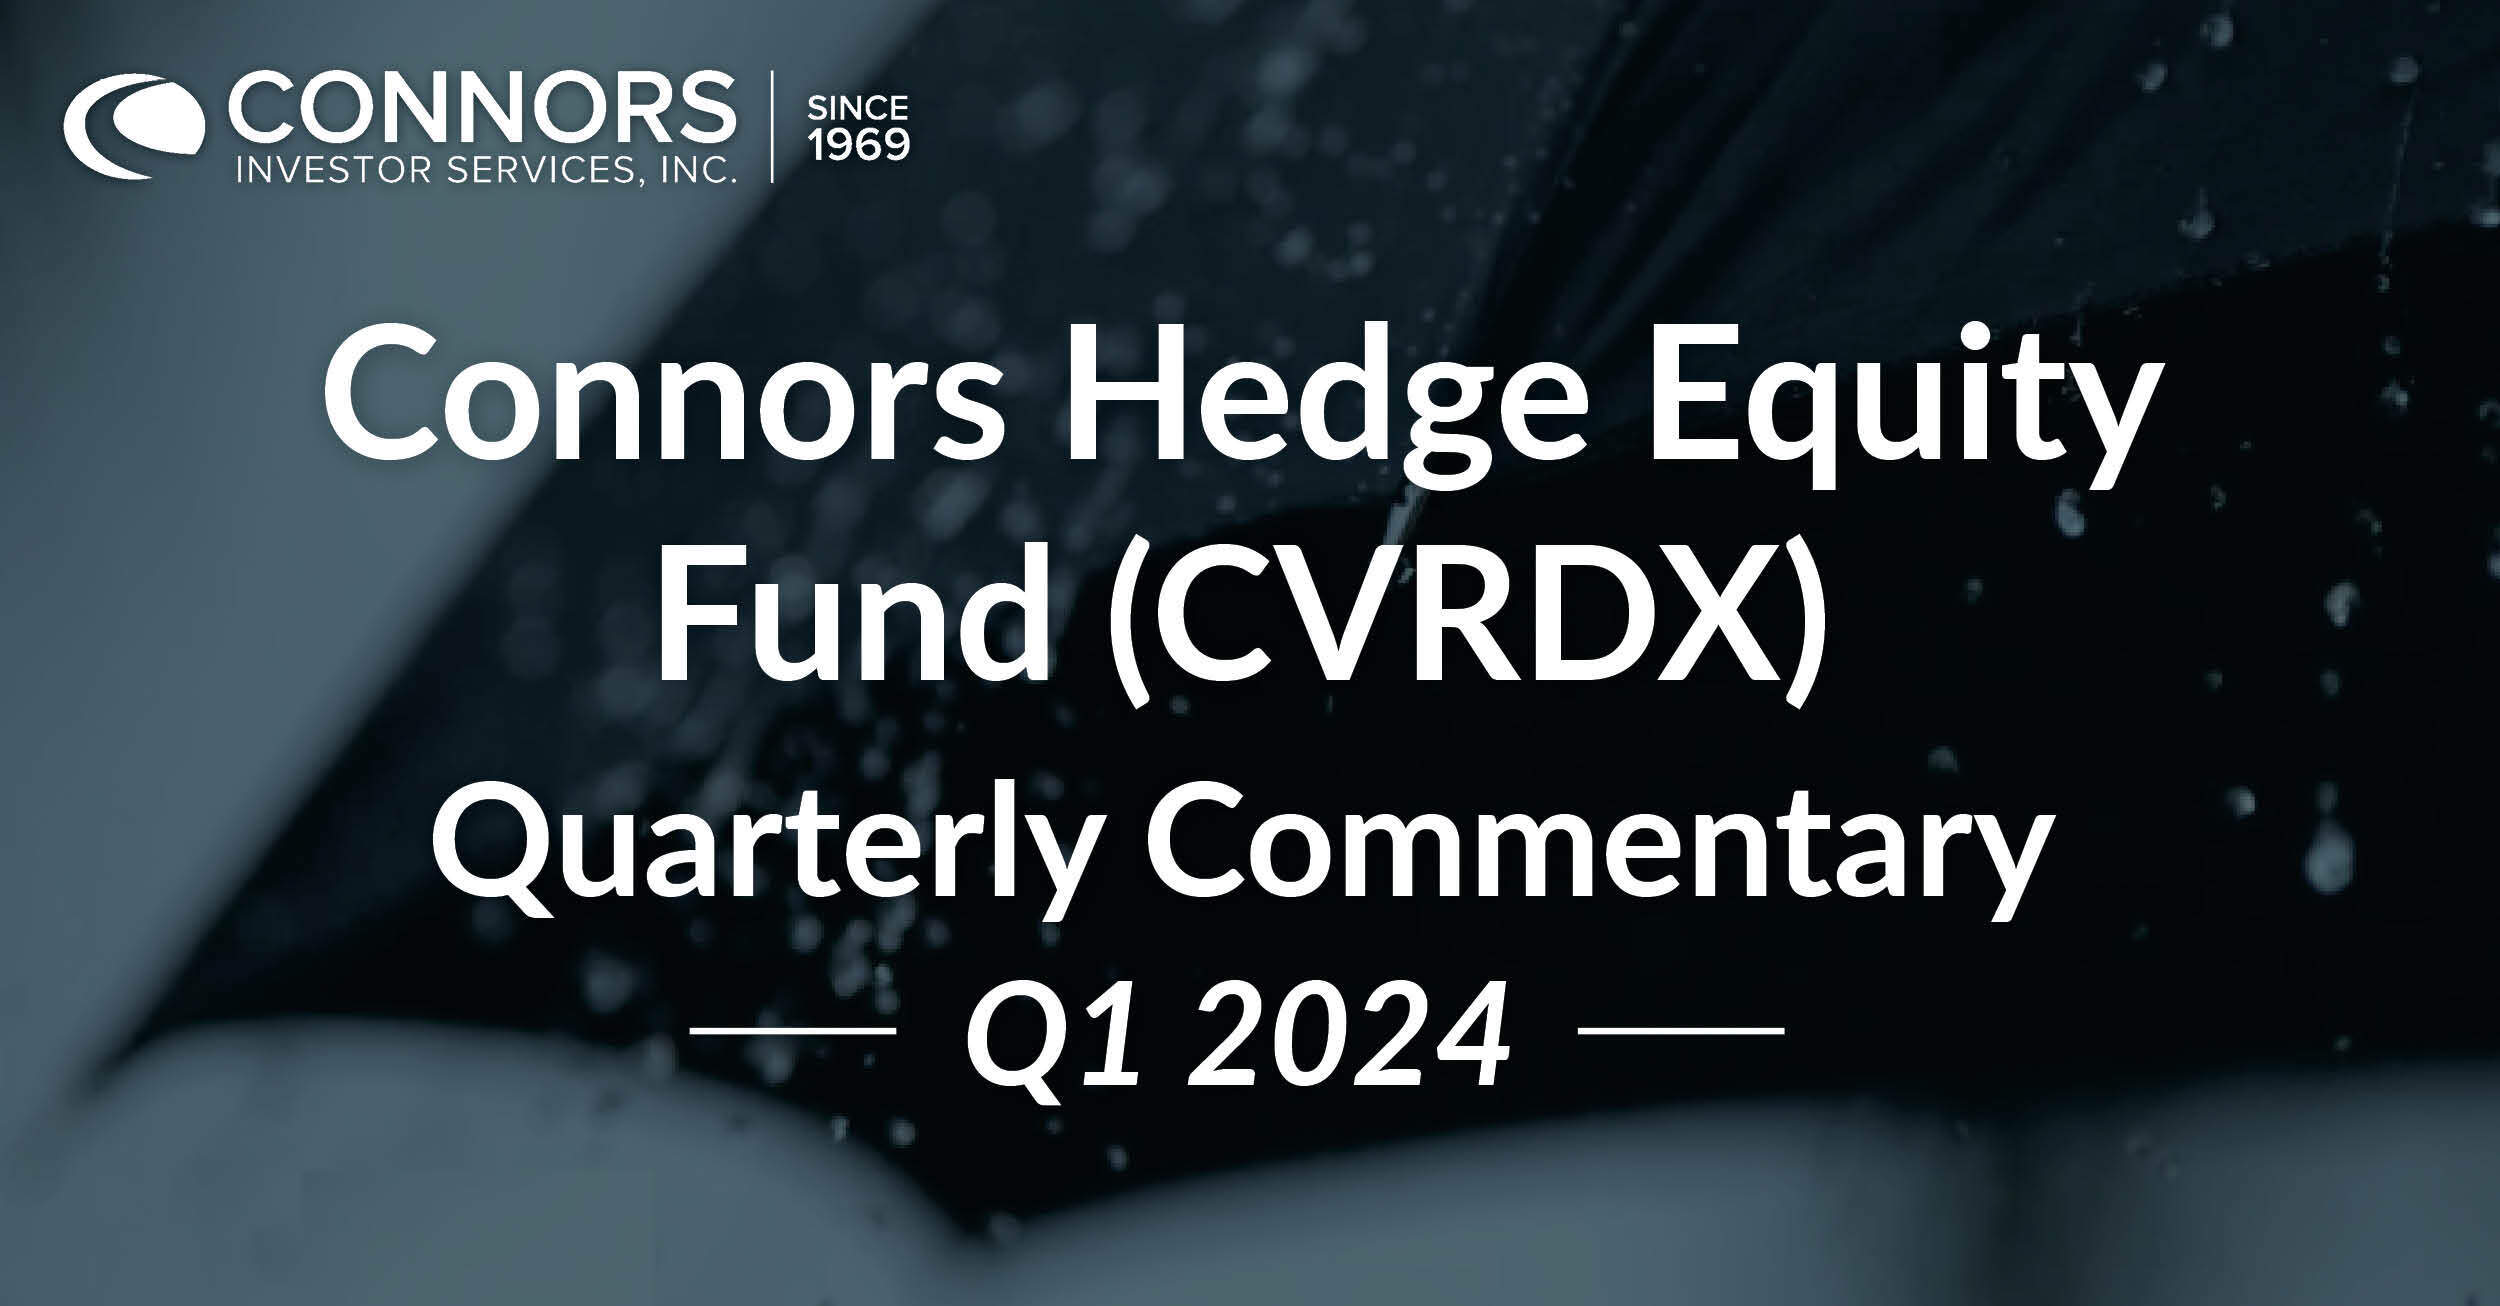 2024 Q1 Connors Hedged Equity Fund (CVRDX) Quarterly Commentary